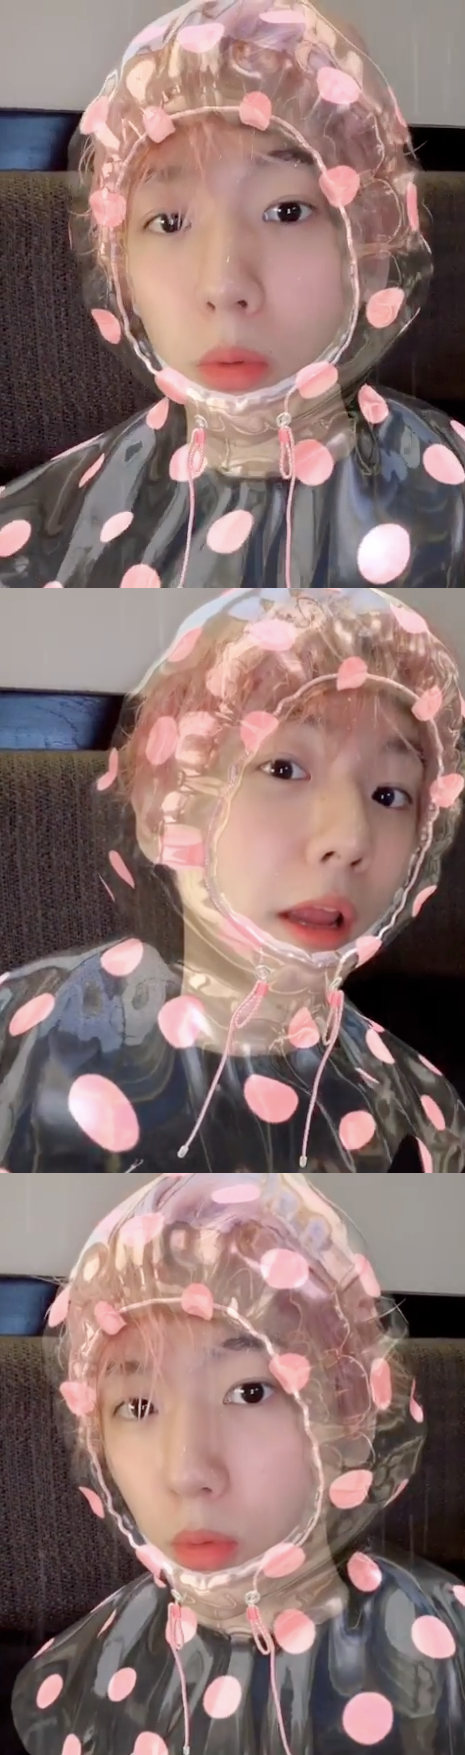 EXO Baekhyun transformed into a rain boy.Baekhyun posted a video on his SNS on the 23rd.In the video, Baekhyun is making various facial expressions using a rain filter. Especially, Baekhyun is showing off his cute charm by looking at the camera with curious eyes.Meanwhile, Baekhyun recently released his first solo album UN Village and received a lot of love.EXO Baekhyun SNS